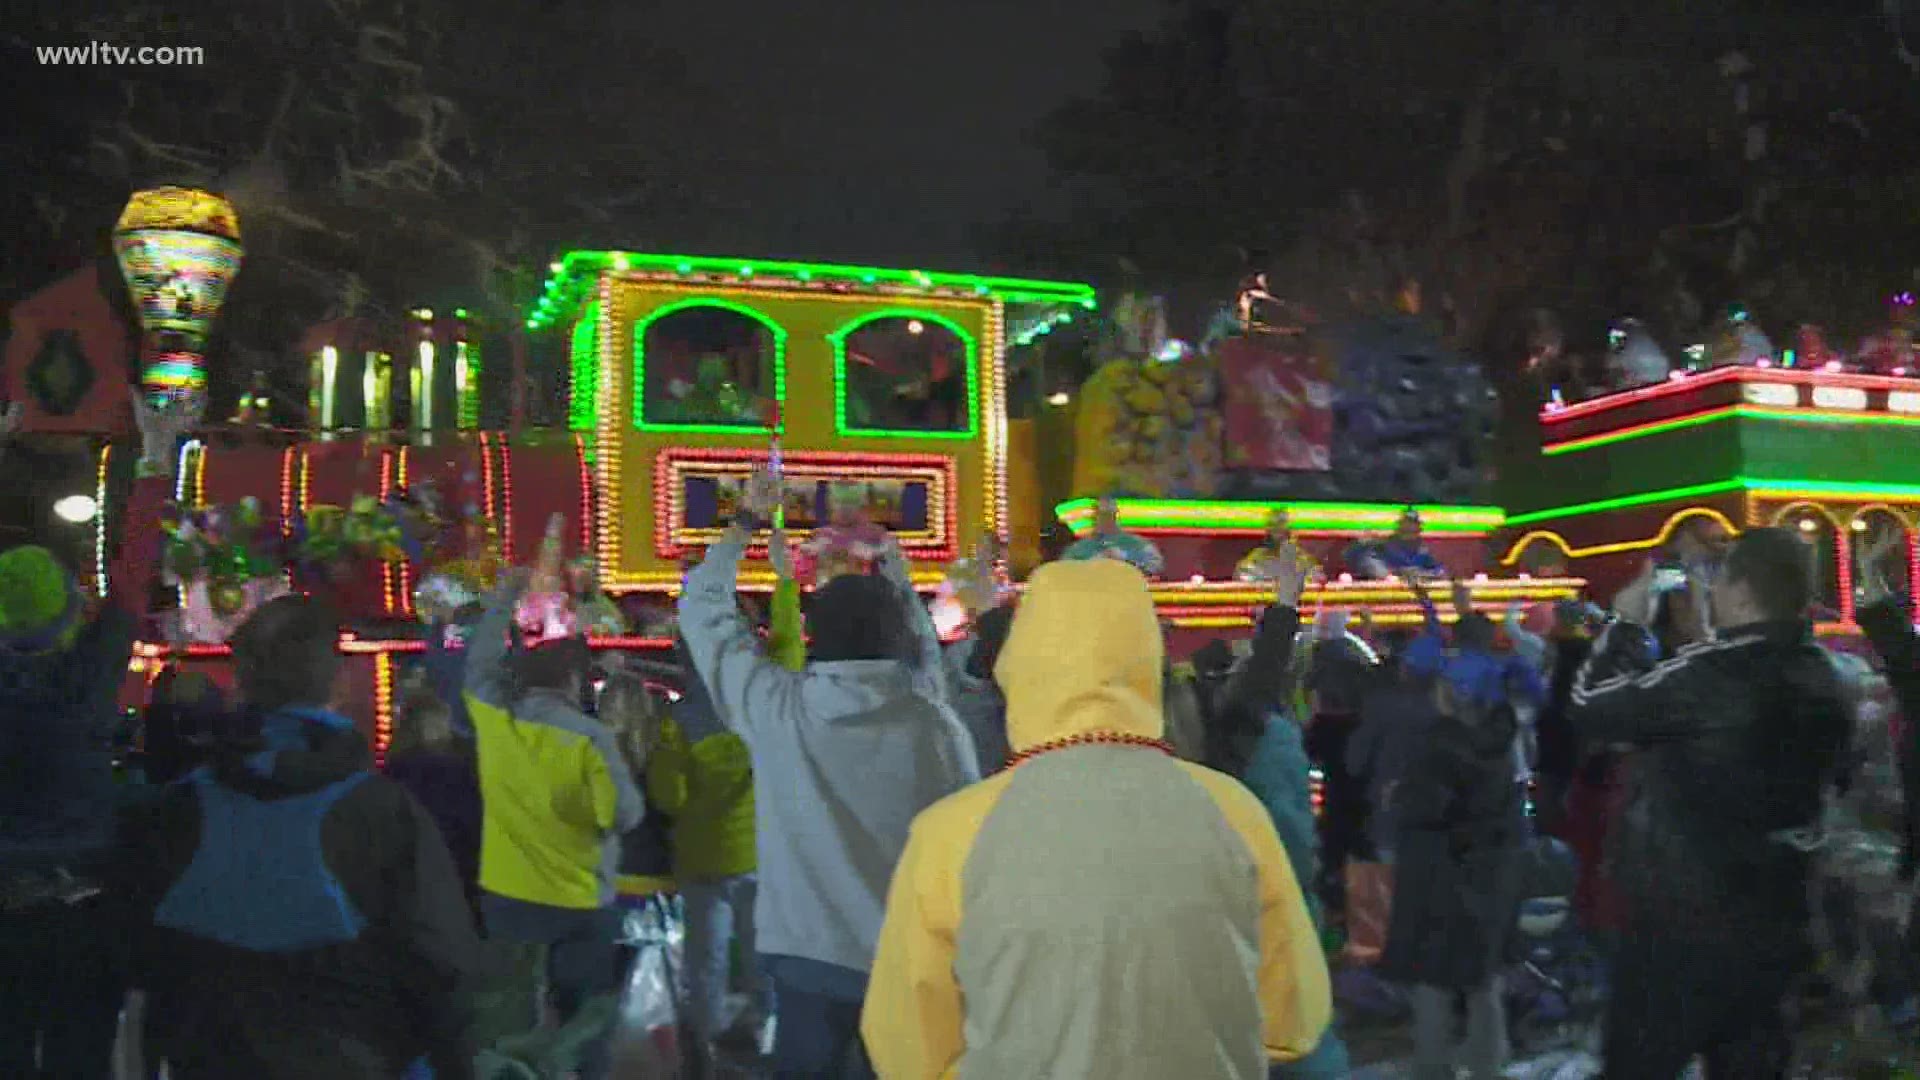 Can you have a Mardi Gras with social distancing? If so, what does that look like?